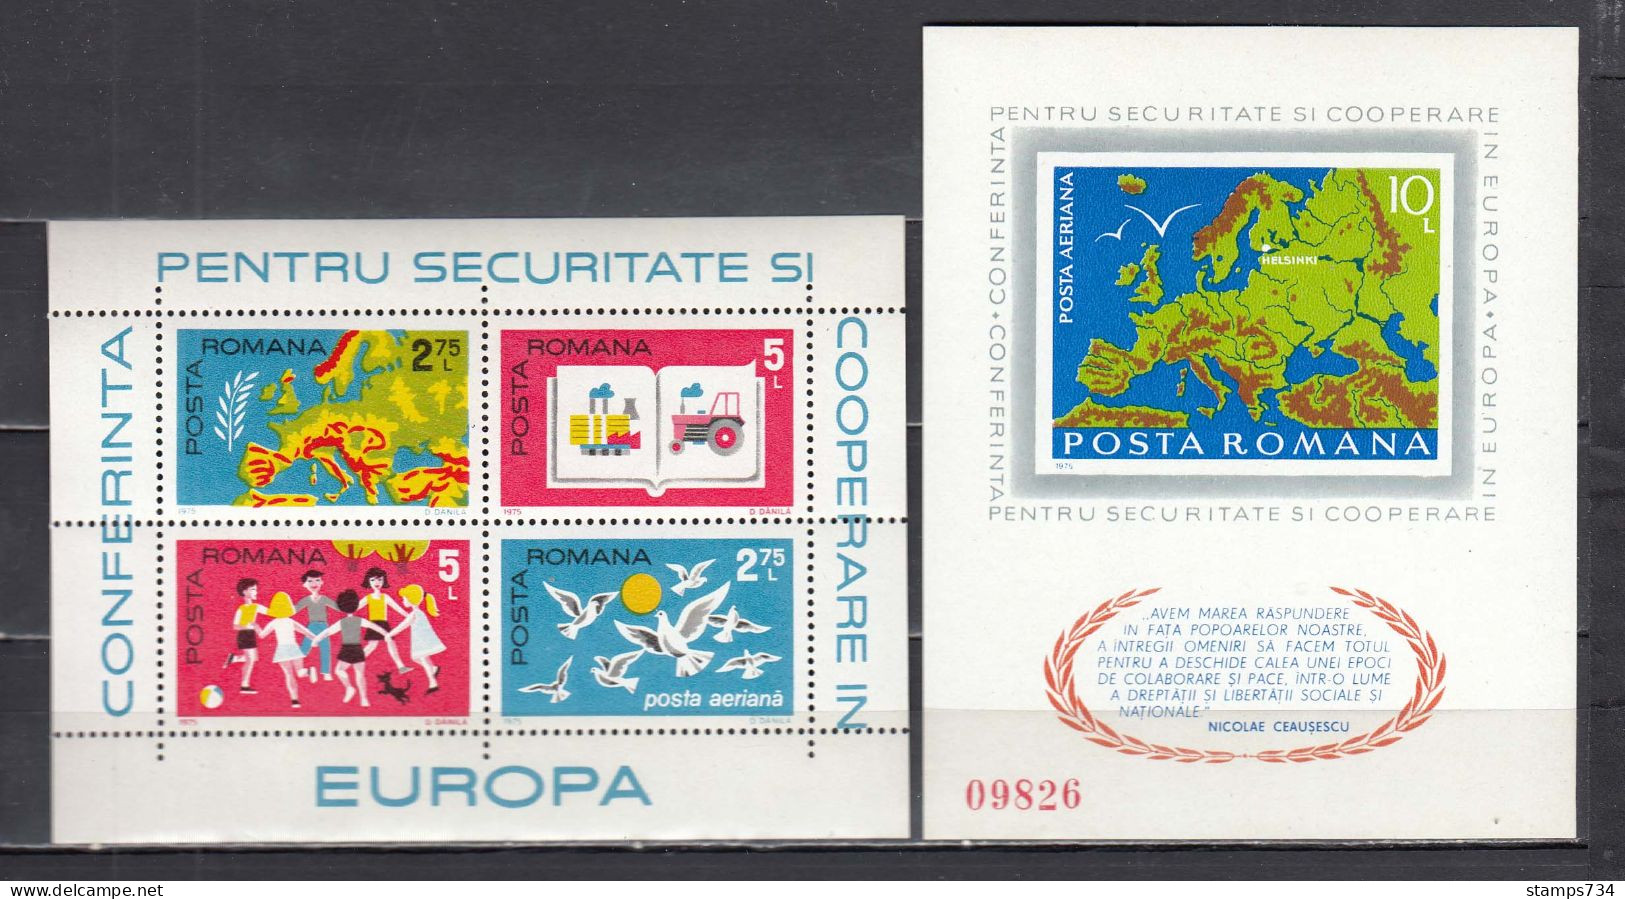 Romania 1975 - Conference On Security And Cooperation In Europe (CSCE), Mi-Nr. Block 124/125, MNH** - Nuovi